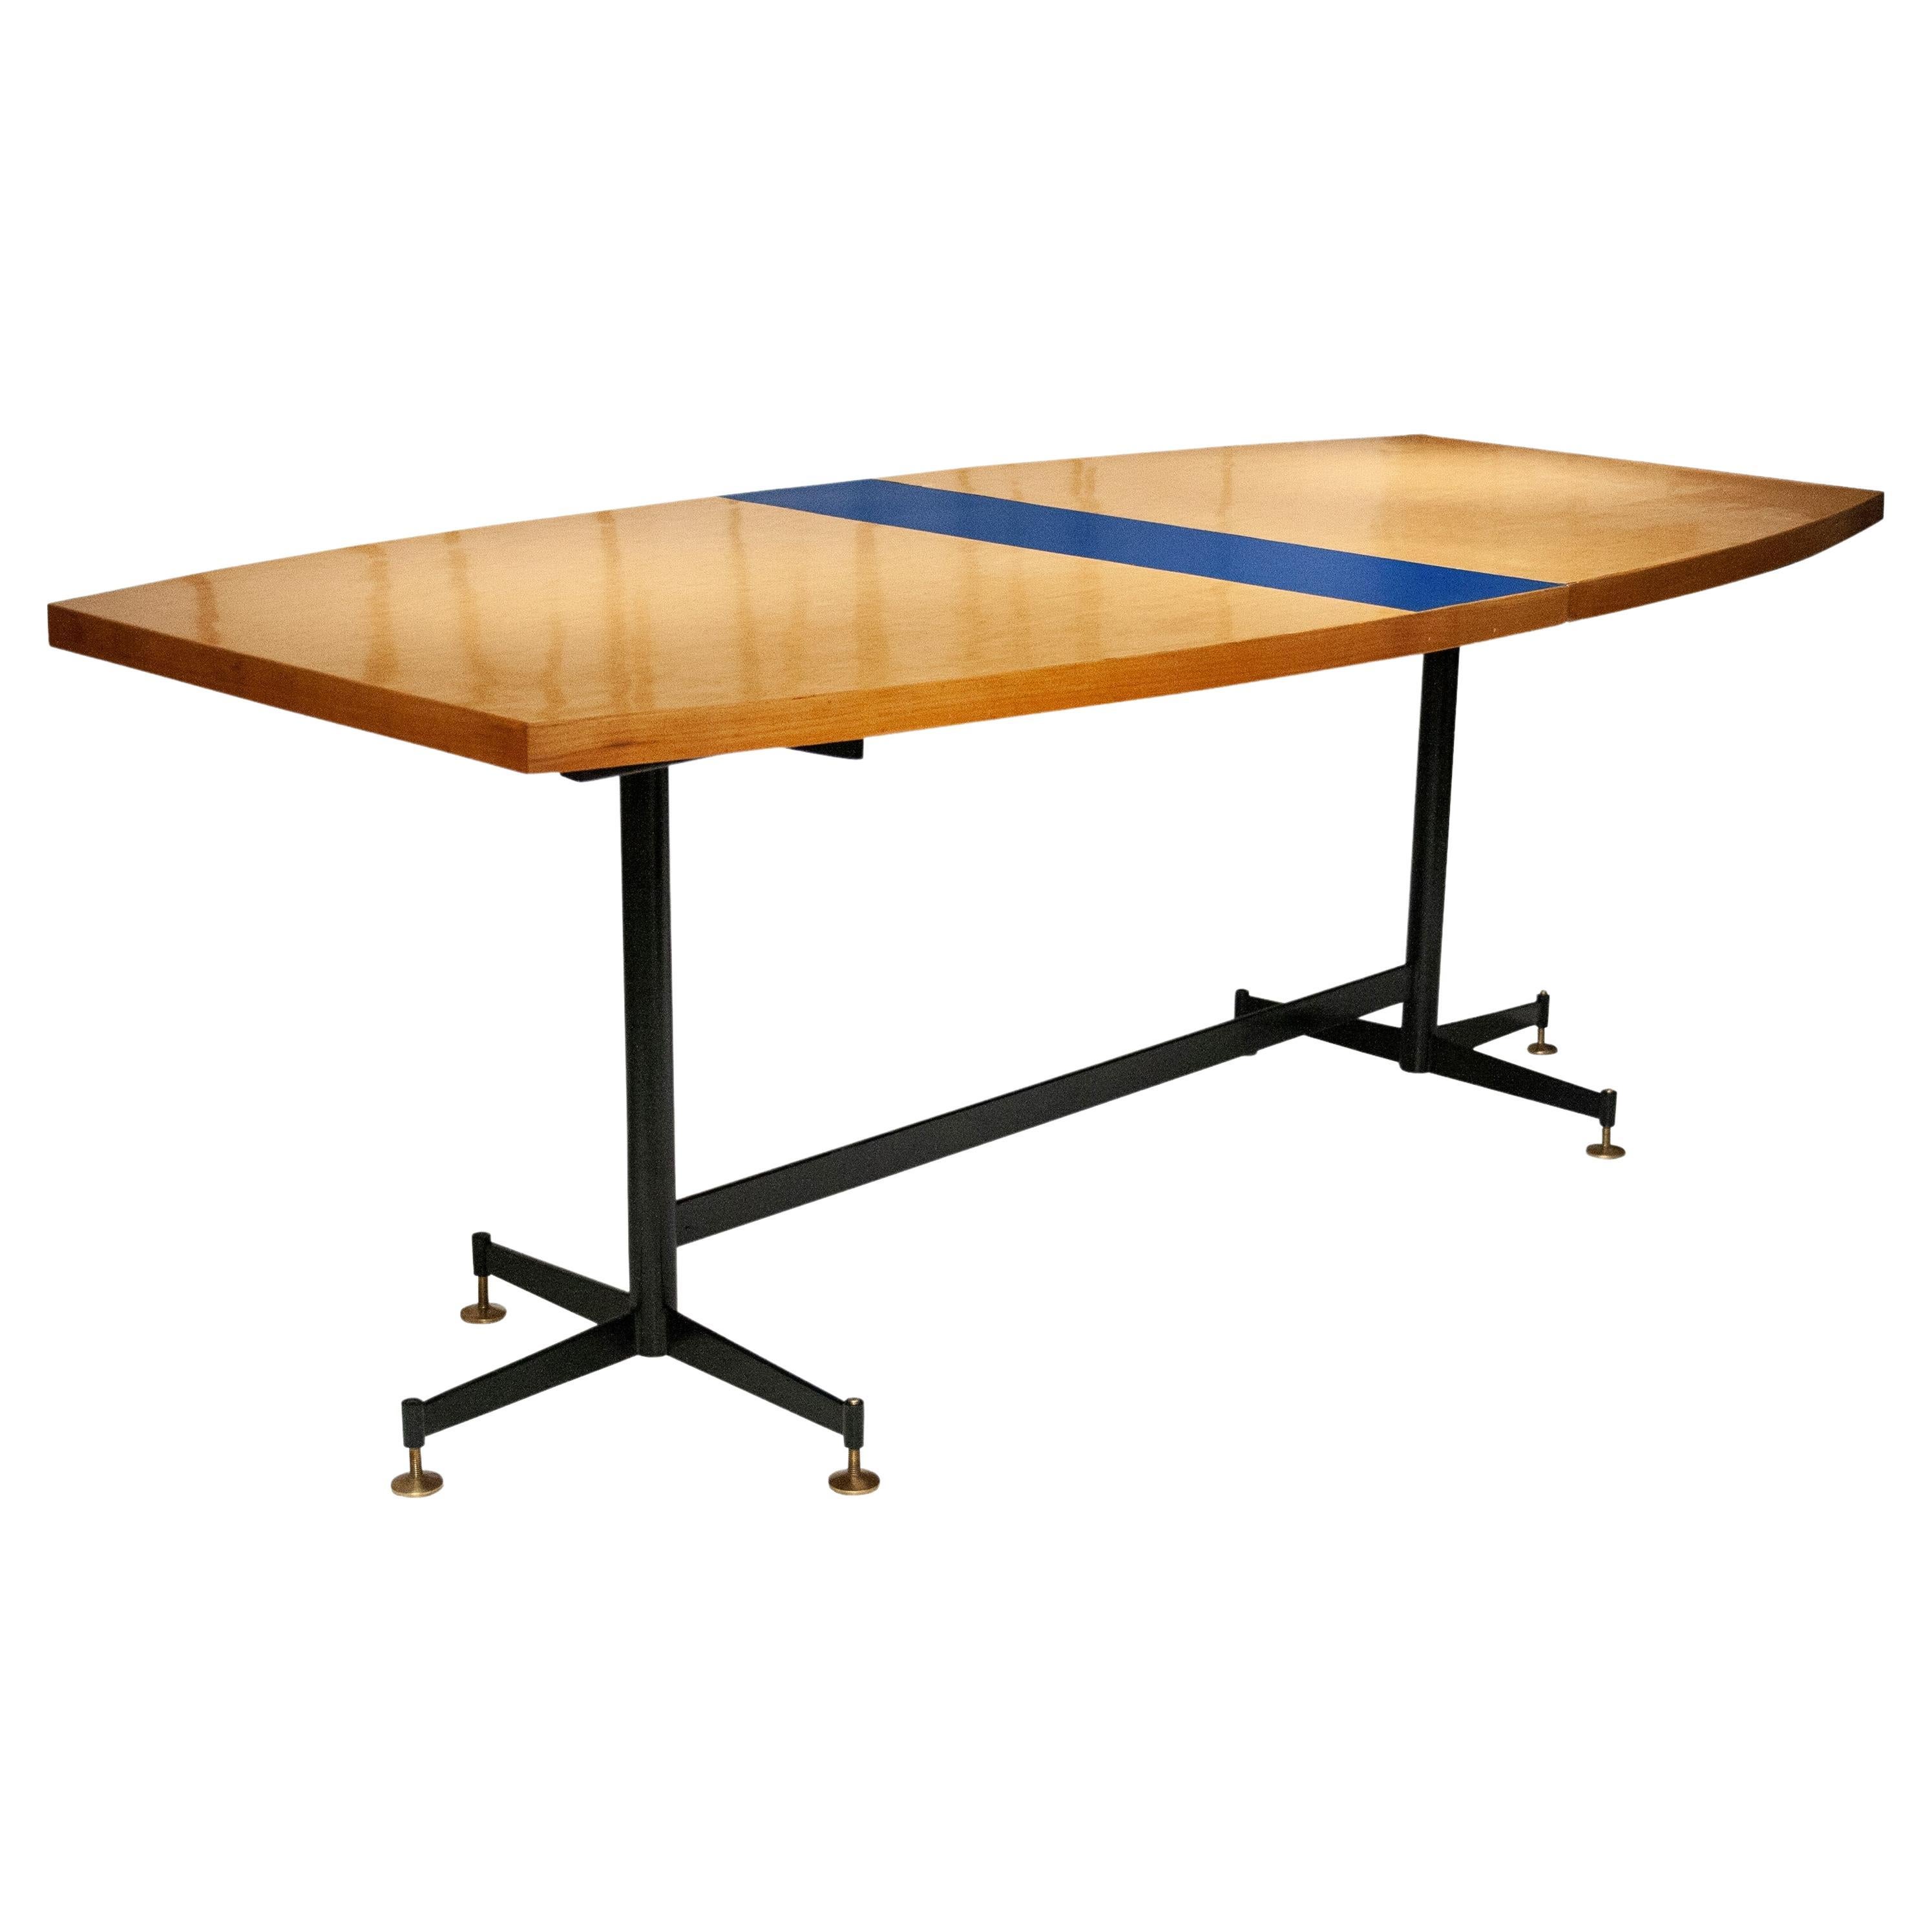 Mid- Century Modern Extendable Table Designed by Luigi Scremin, Italy, 1950. For Sale